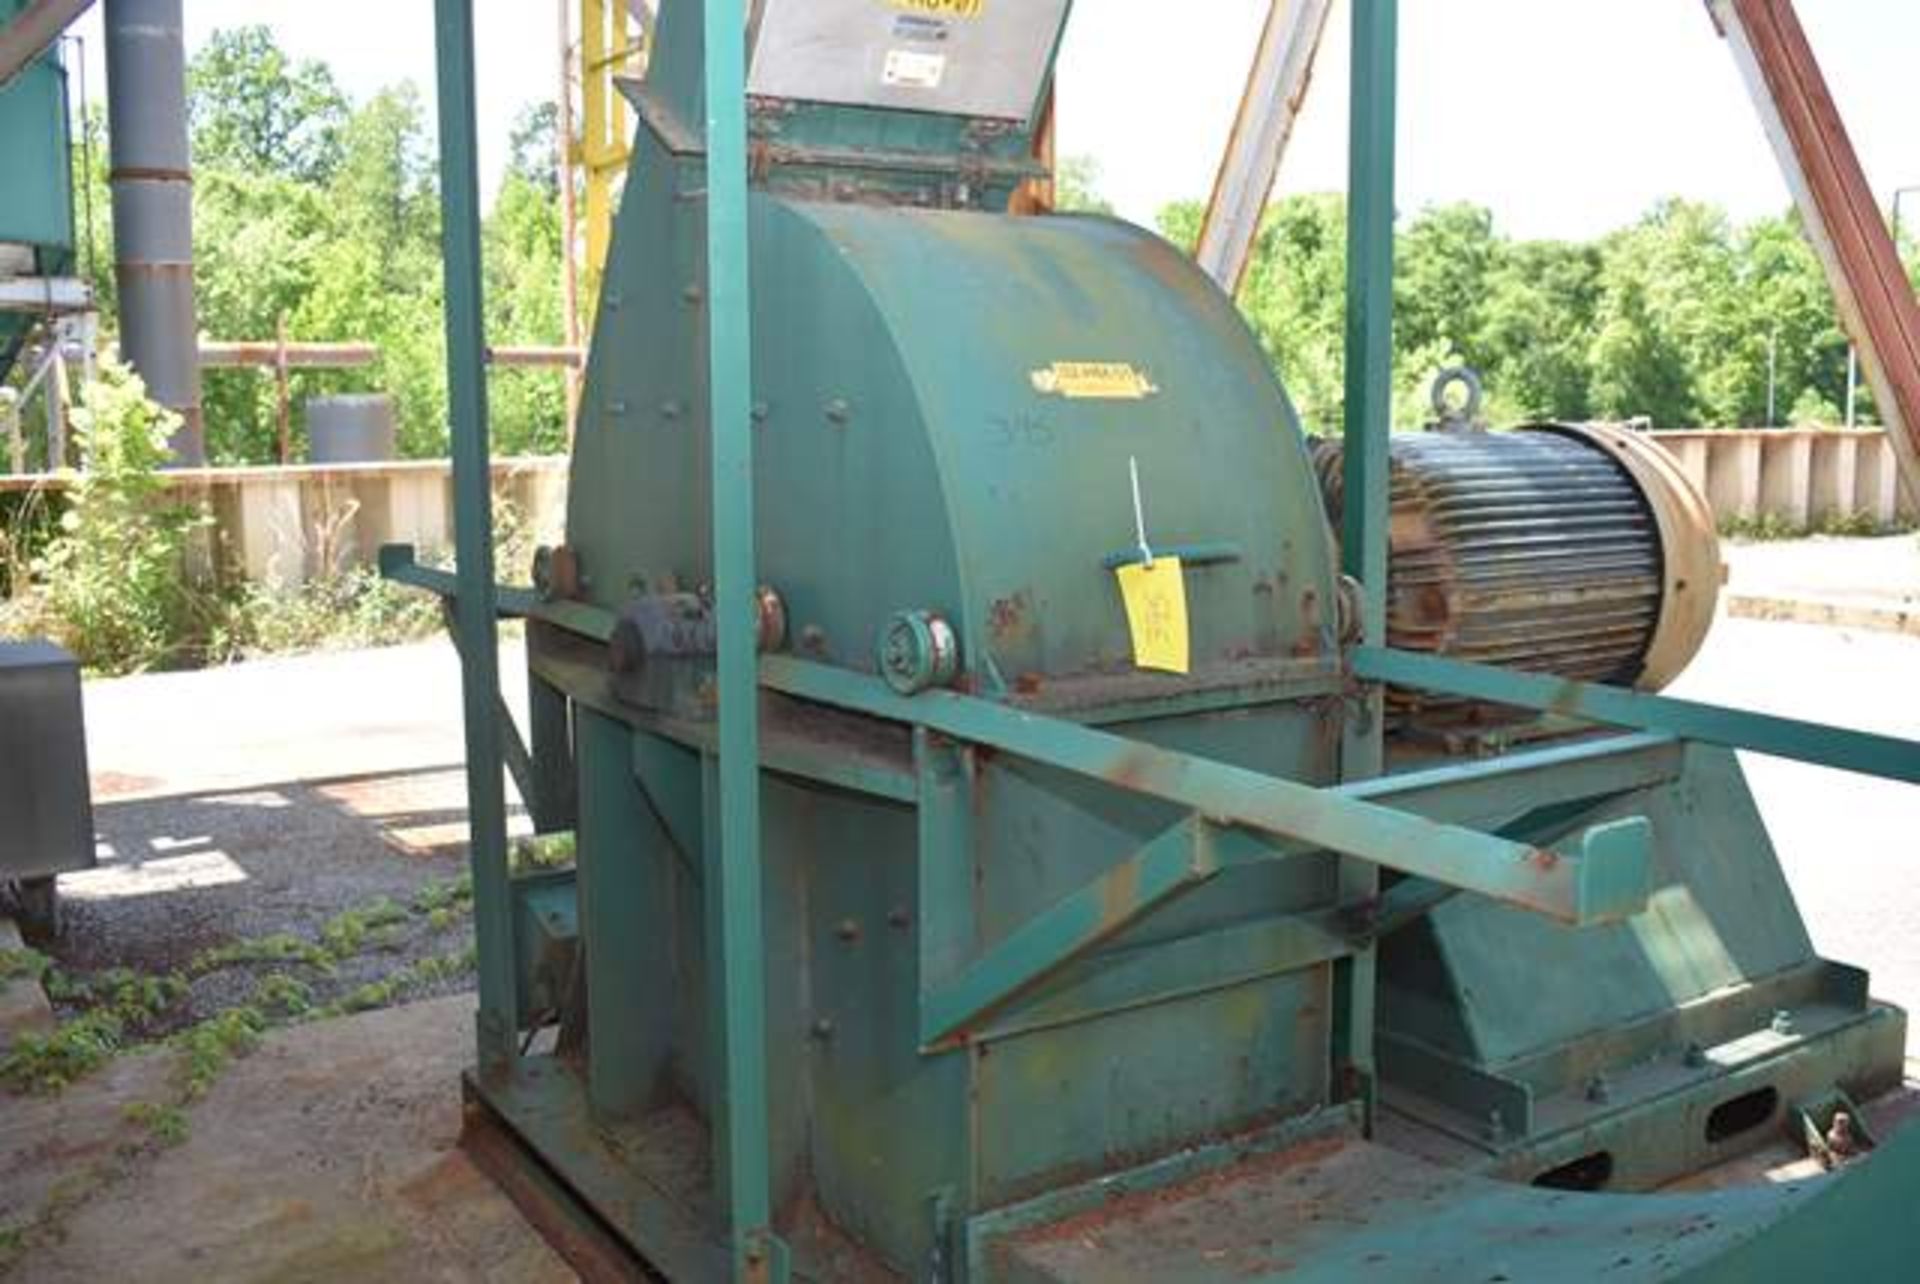 Hammer Mill 200 HP Motor - Green, Includes Bunting Magnet, SN N/A, ID 02-MG-01